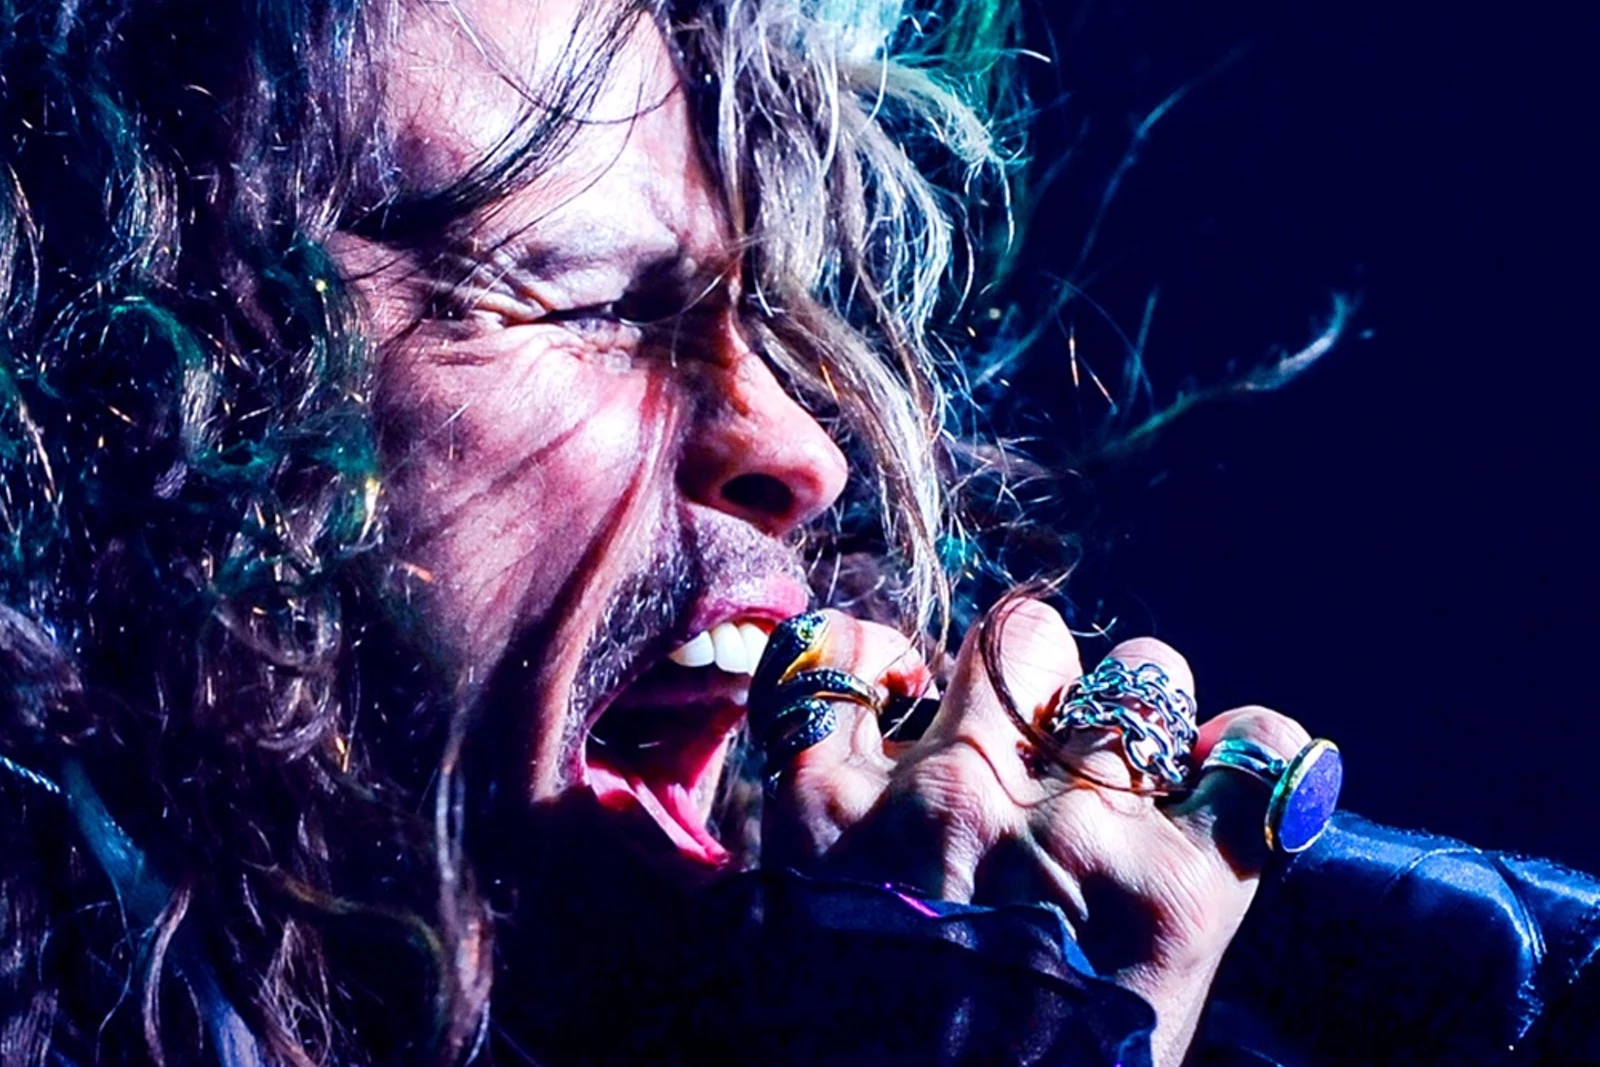 Steven Tyler Has Completed a 'Sick' Rolling Stones Cover